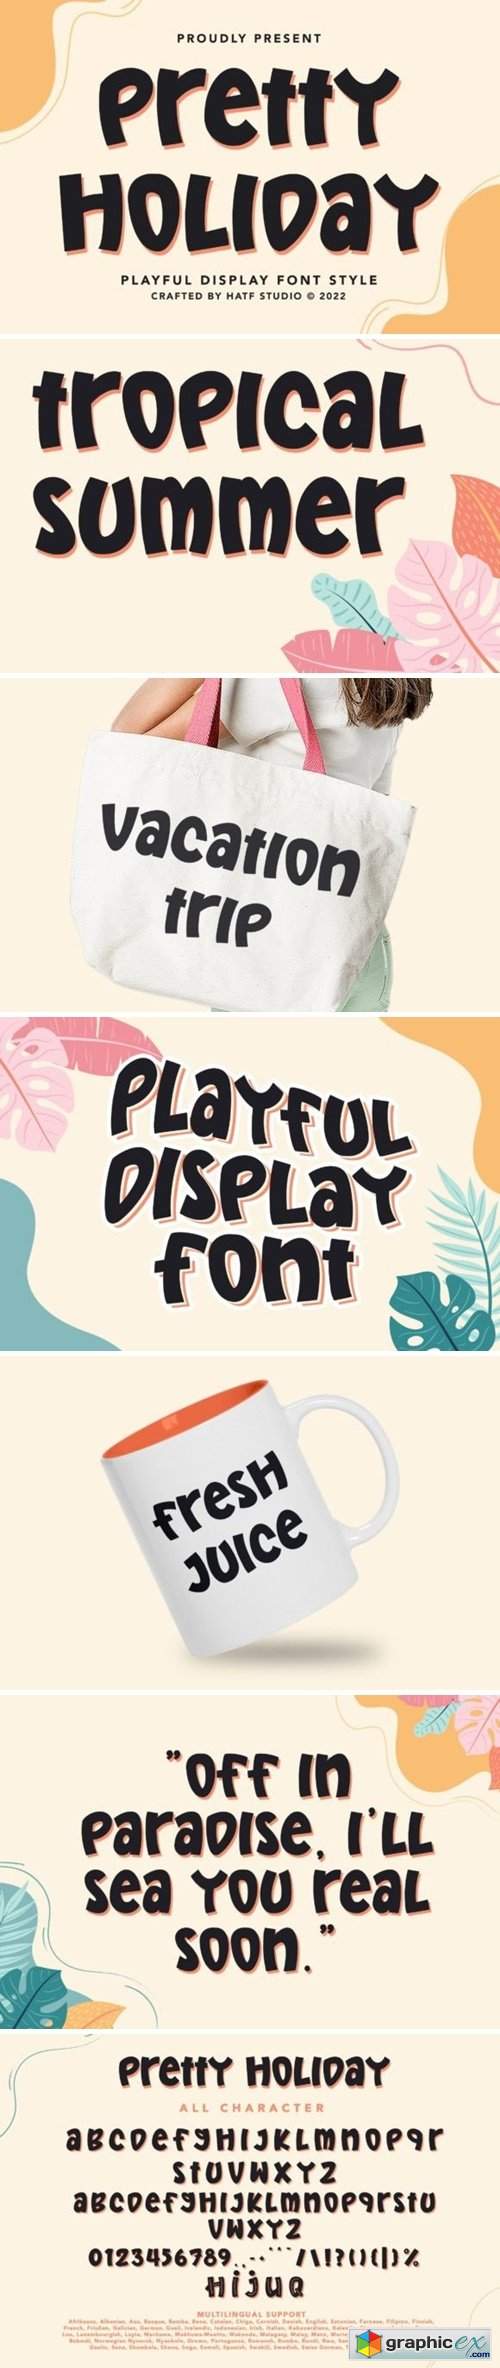  Pretty Holiday Font 